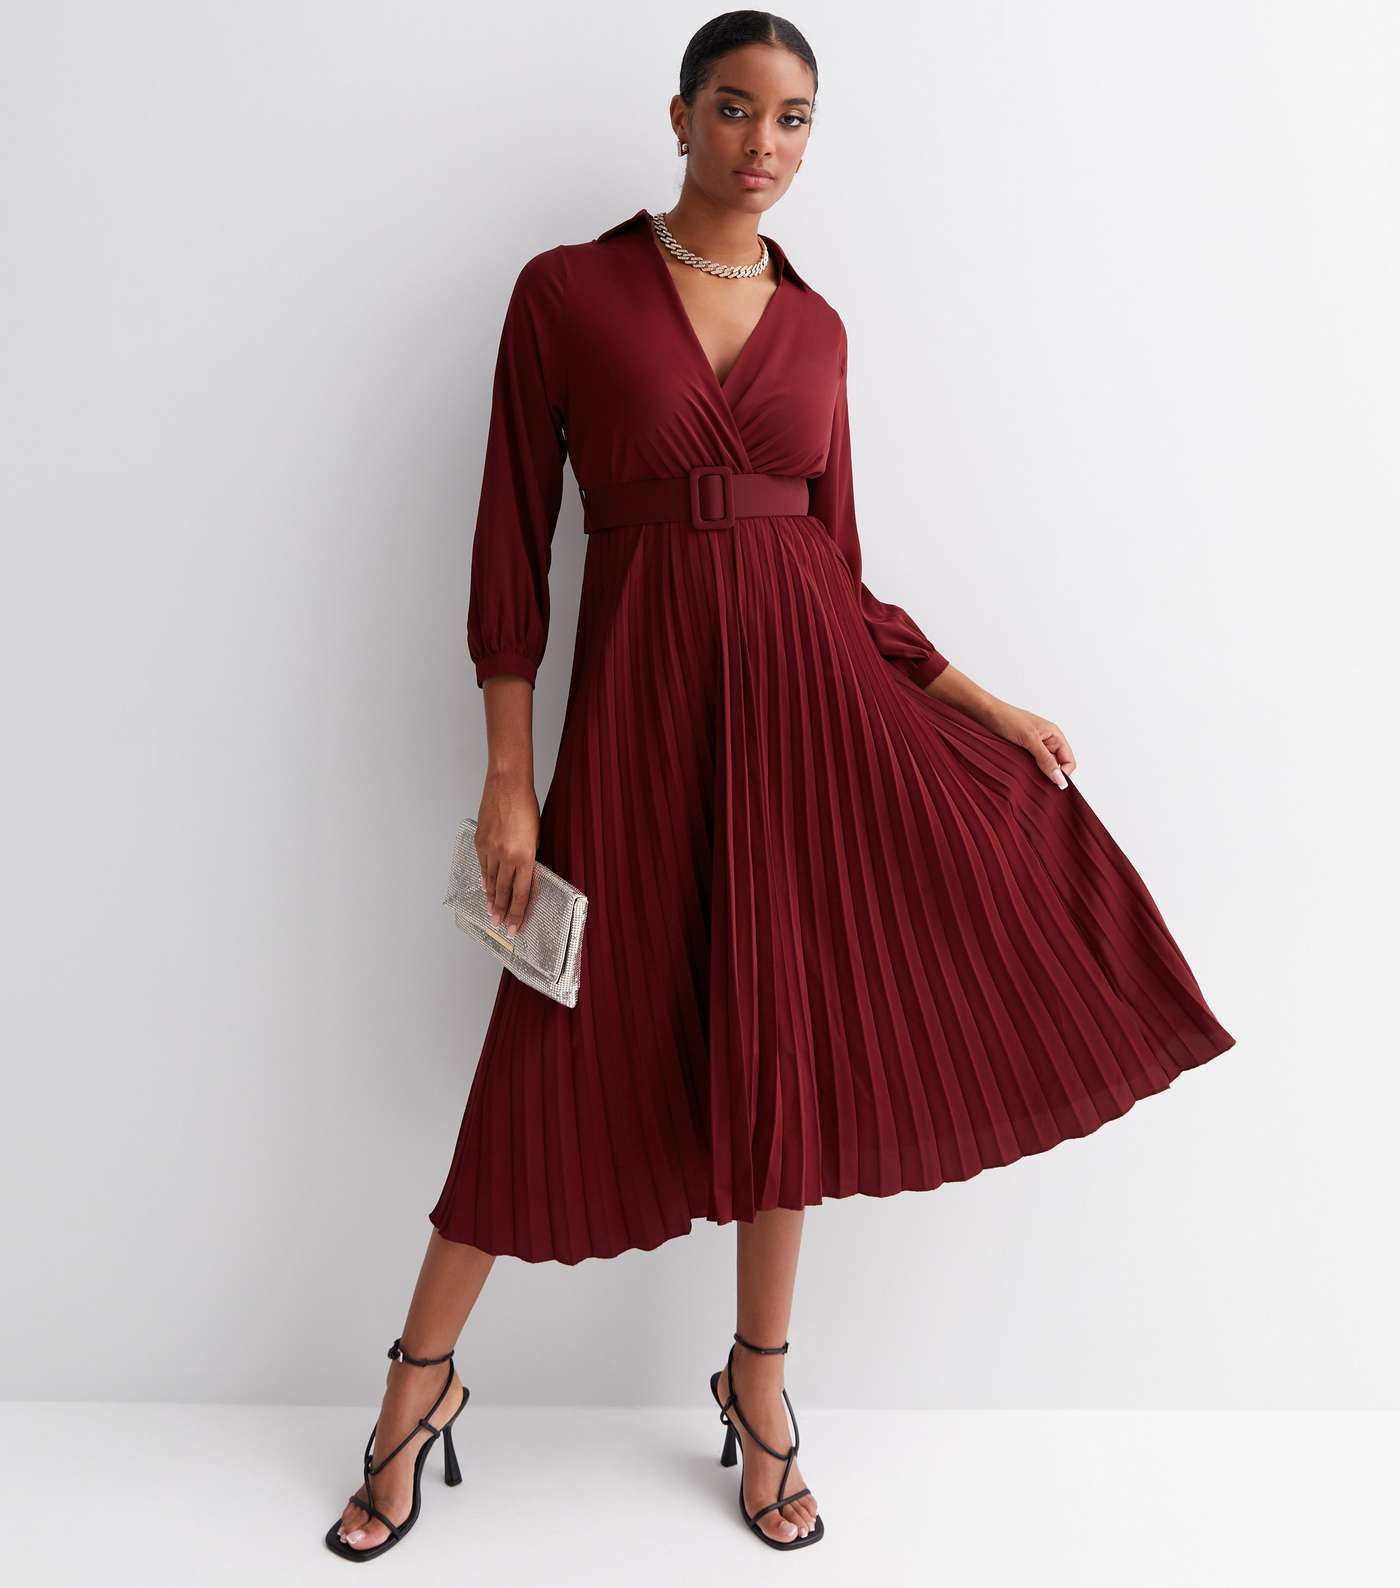 Cameo Rose Burgundy Satin Collared Pleated Belted Midi Wrap Dress Image 2